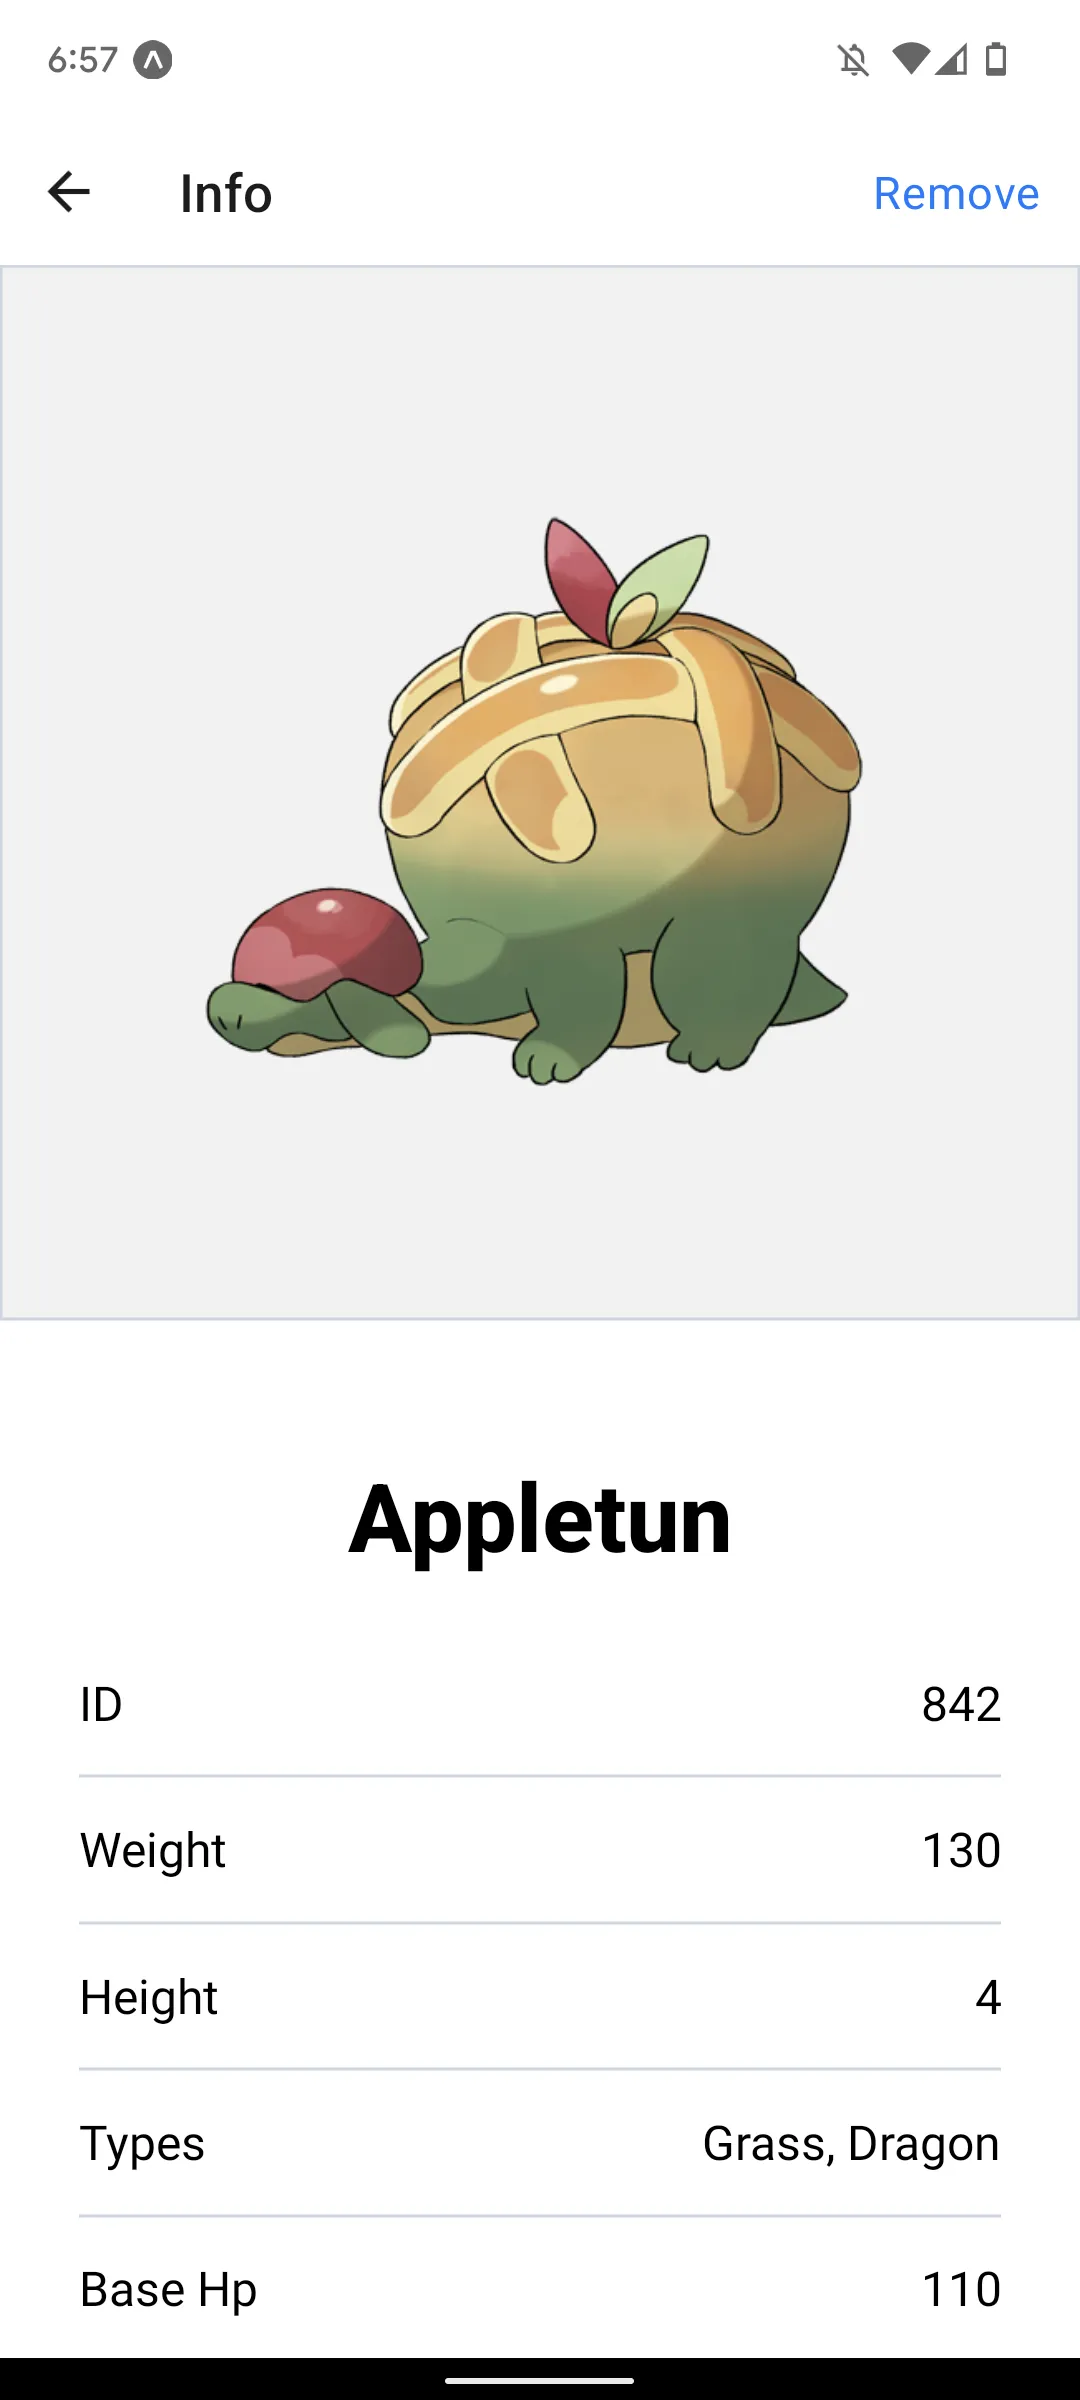 Appletun has already been added, so the button says "Remove", as
expected